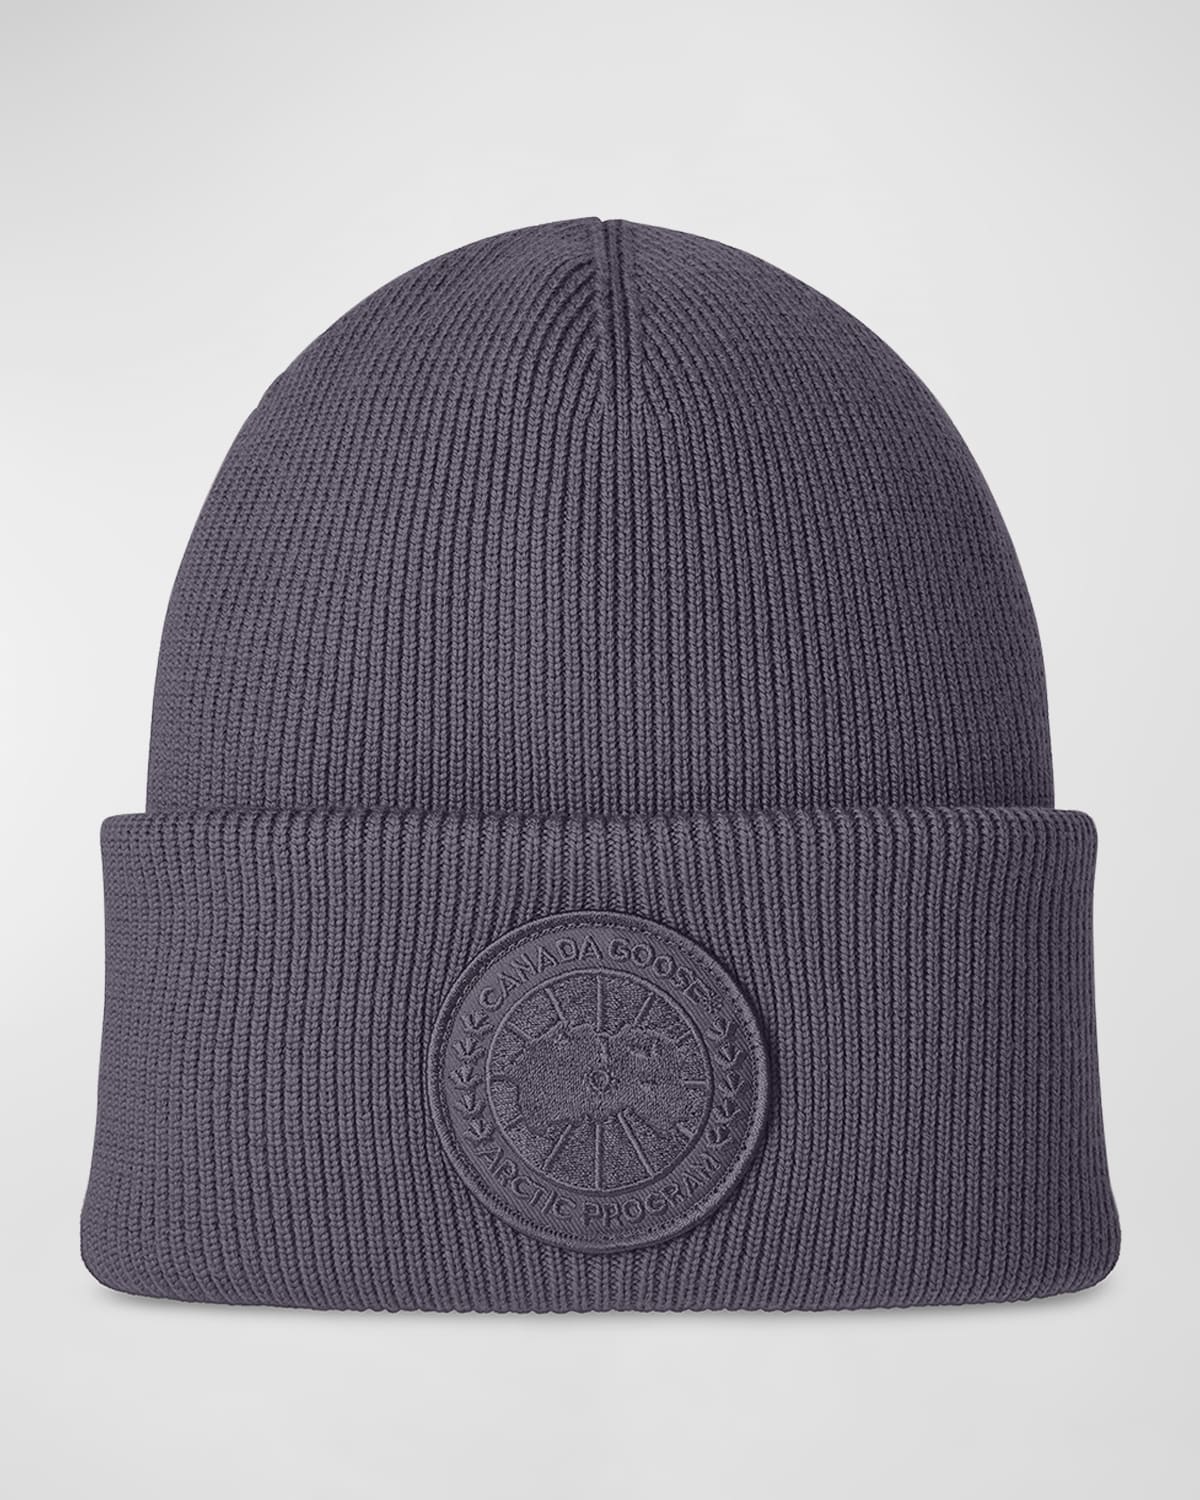 Canada Goose Arctic Toque Wool Knit Beanie In Thistle Purple